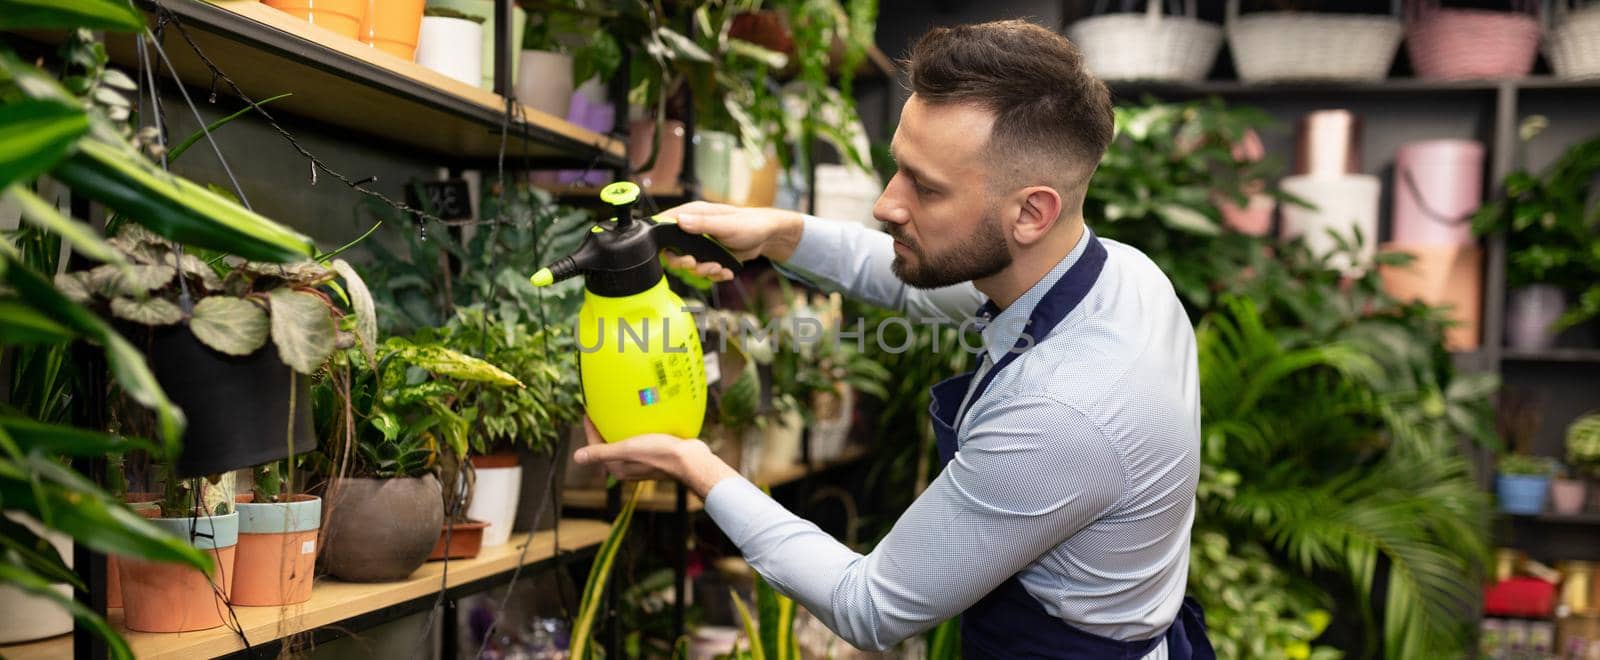 flower shop worker looking after potted plants.